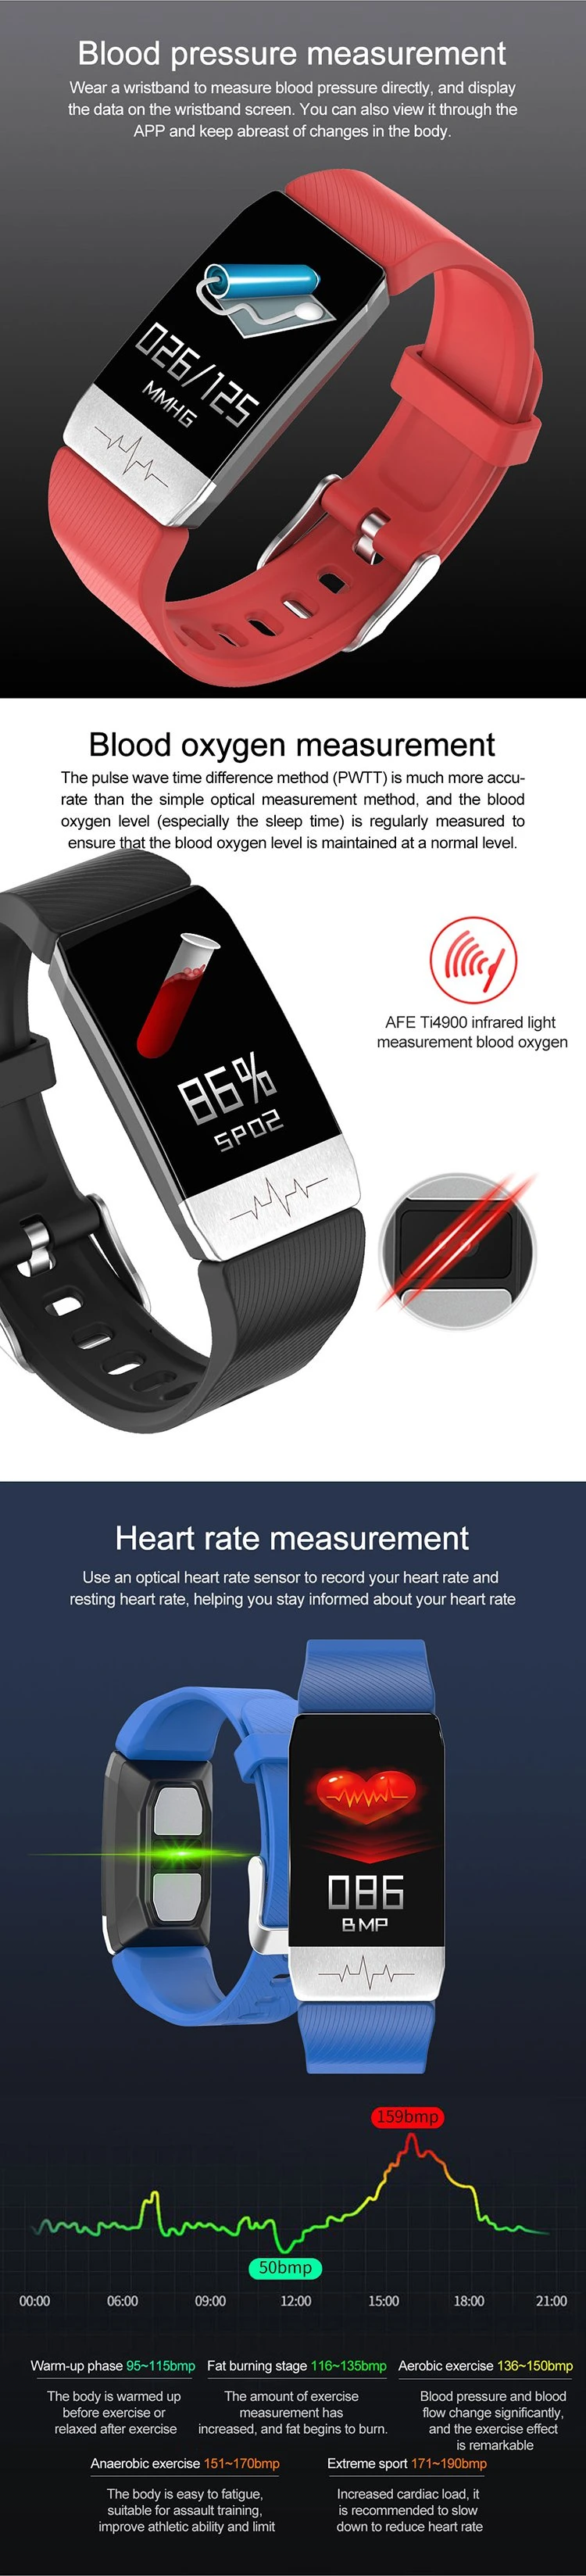 Smartband Bracelet Fitness Track Heart Rate Testing IP67 Waterproof Band Watches Health Monitoring Body Temperature Monitoring Sports Gift Watches Live